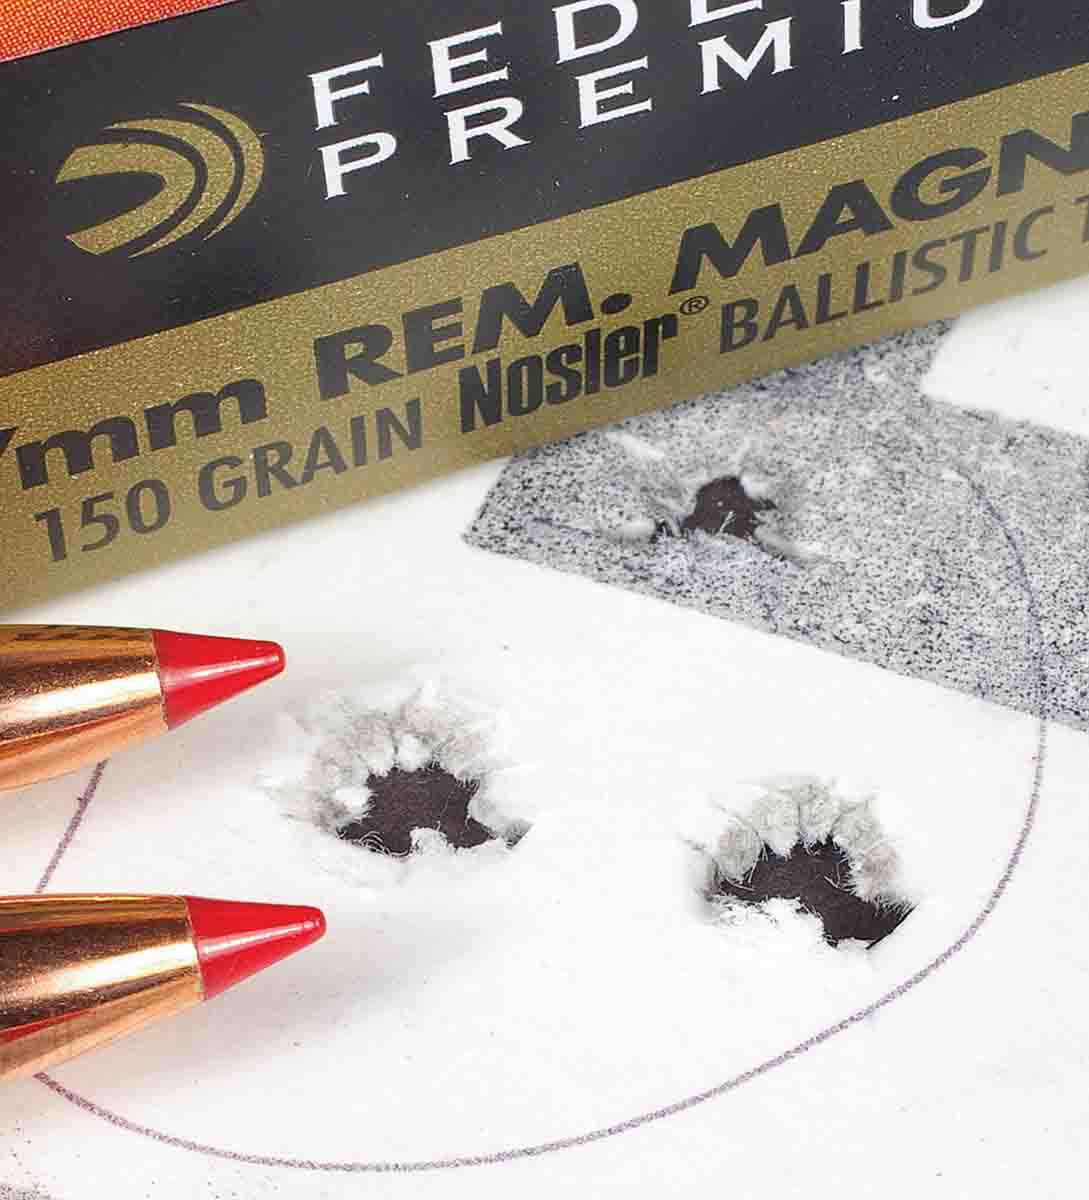 The Browning test rifle shot best with Federal Premium 7mm Remington Magnum cartridges loaded with Nosler 150-grain Ballistic Tips.